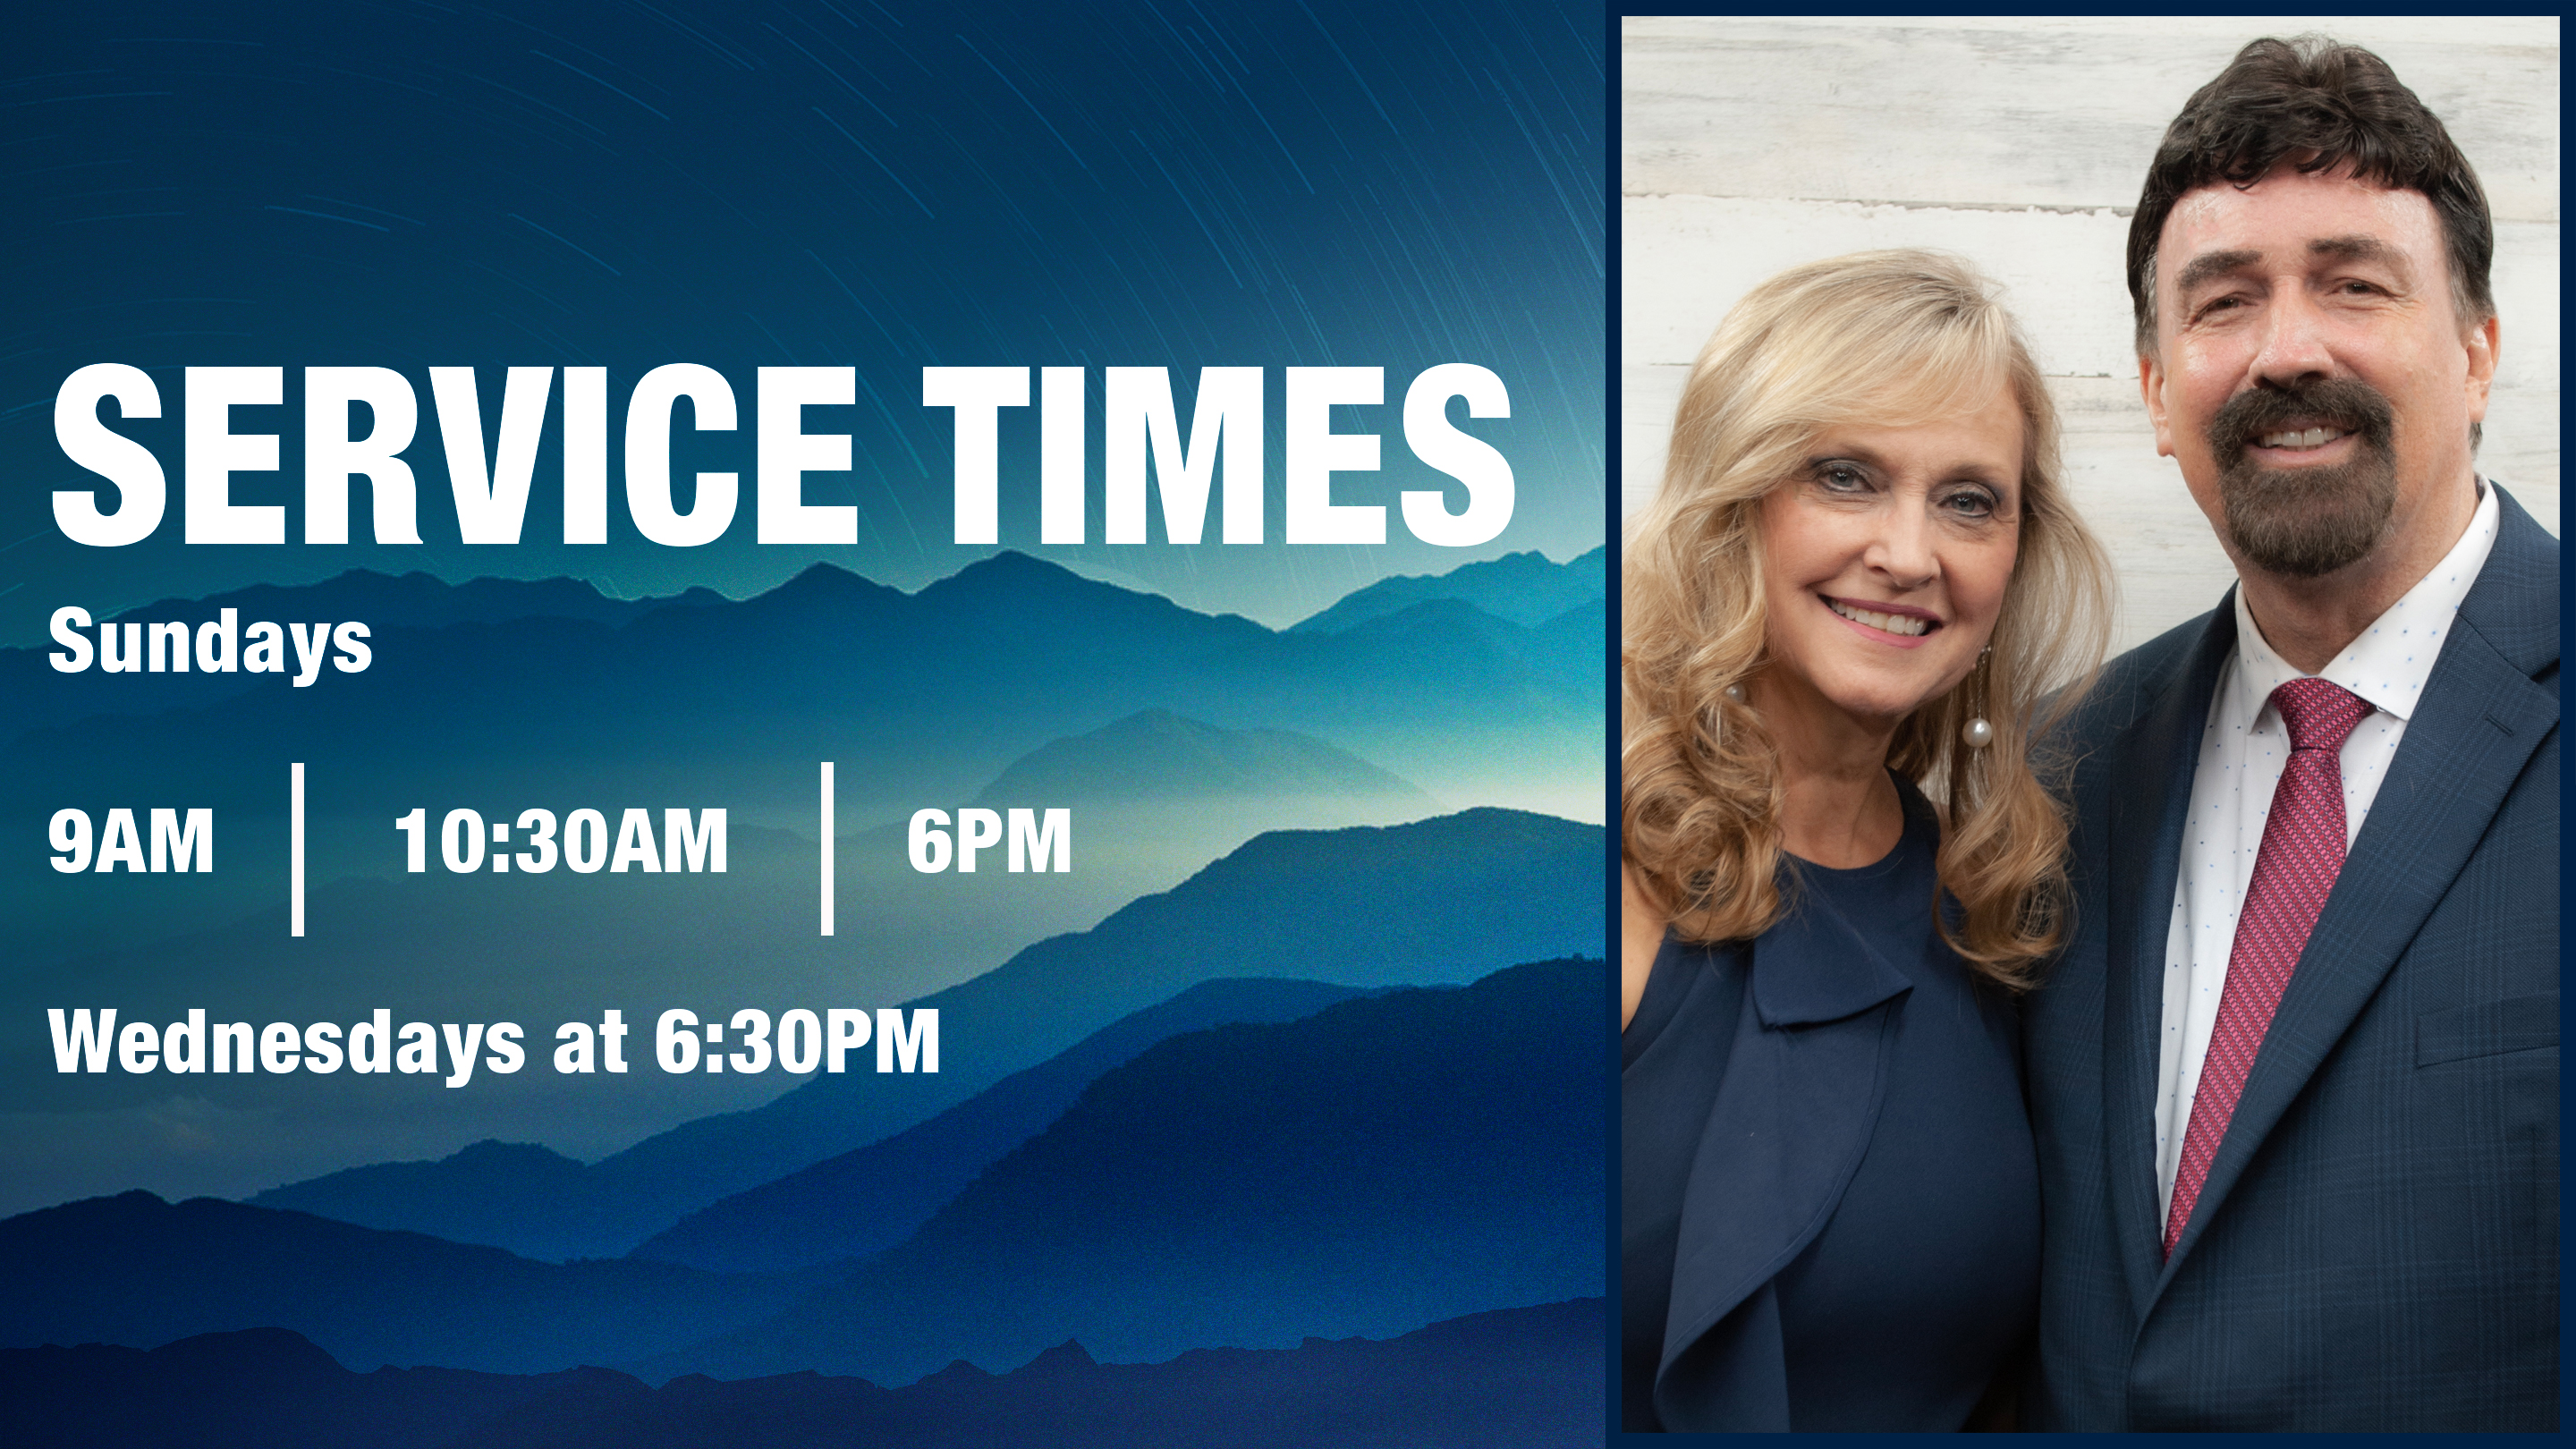 Serivce times for synergy church ministries, including Pastor Dana and Nan Gammill